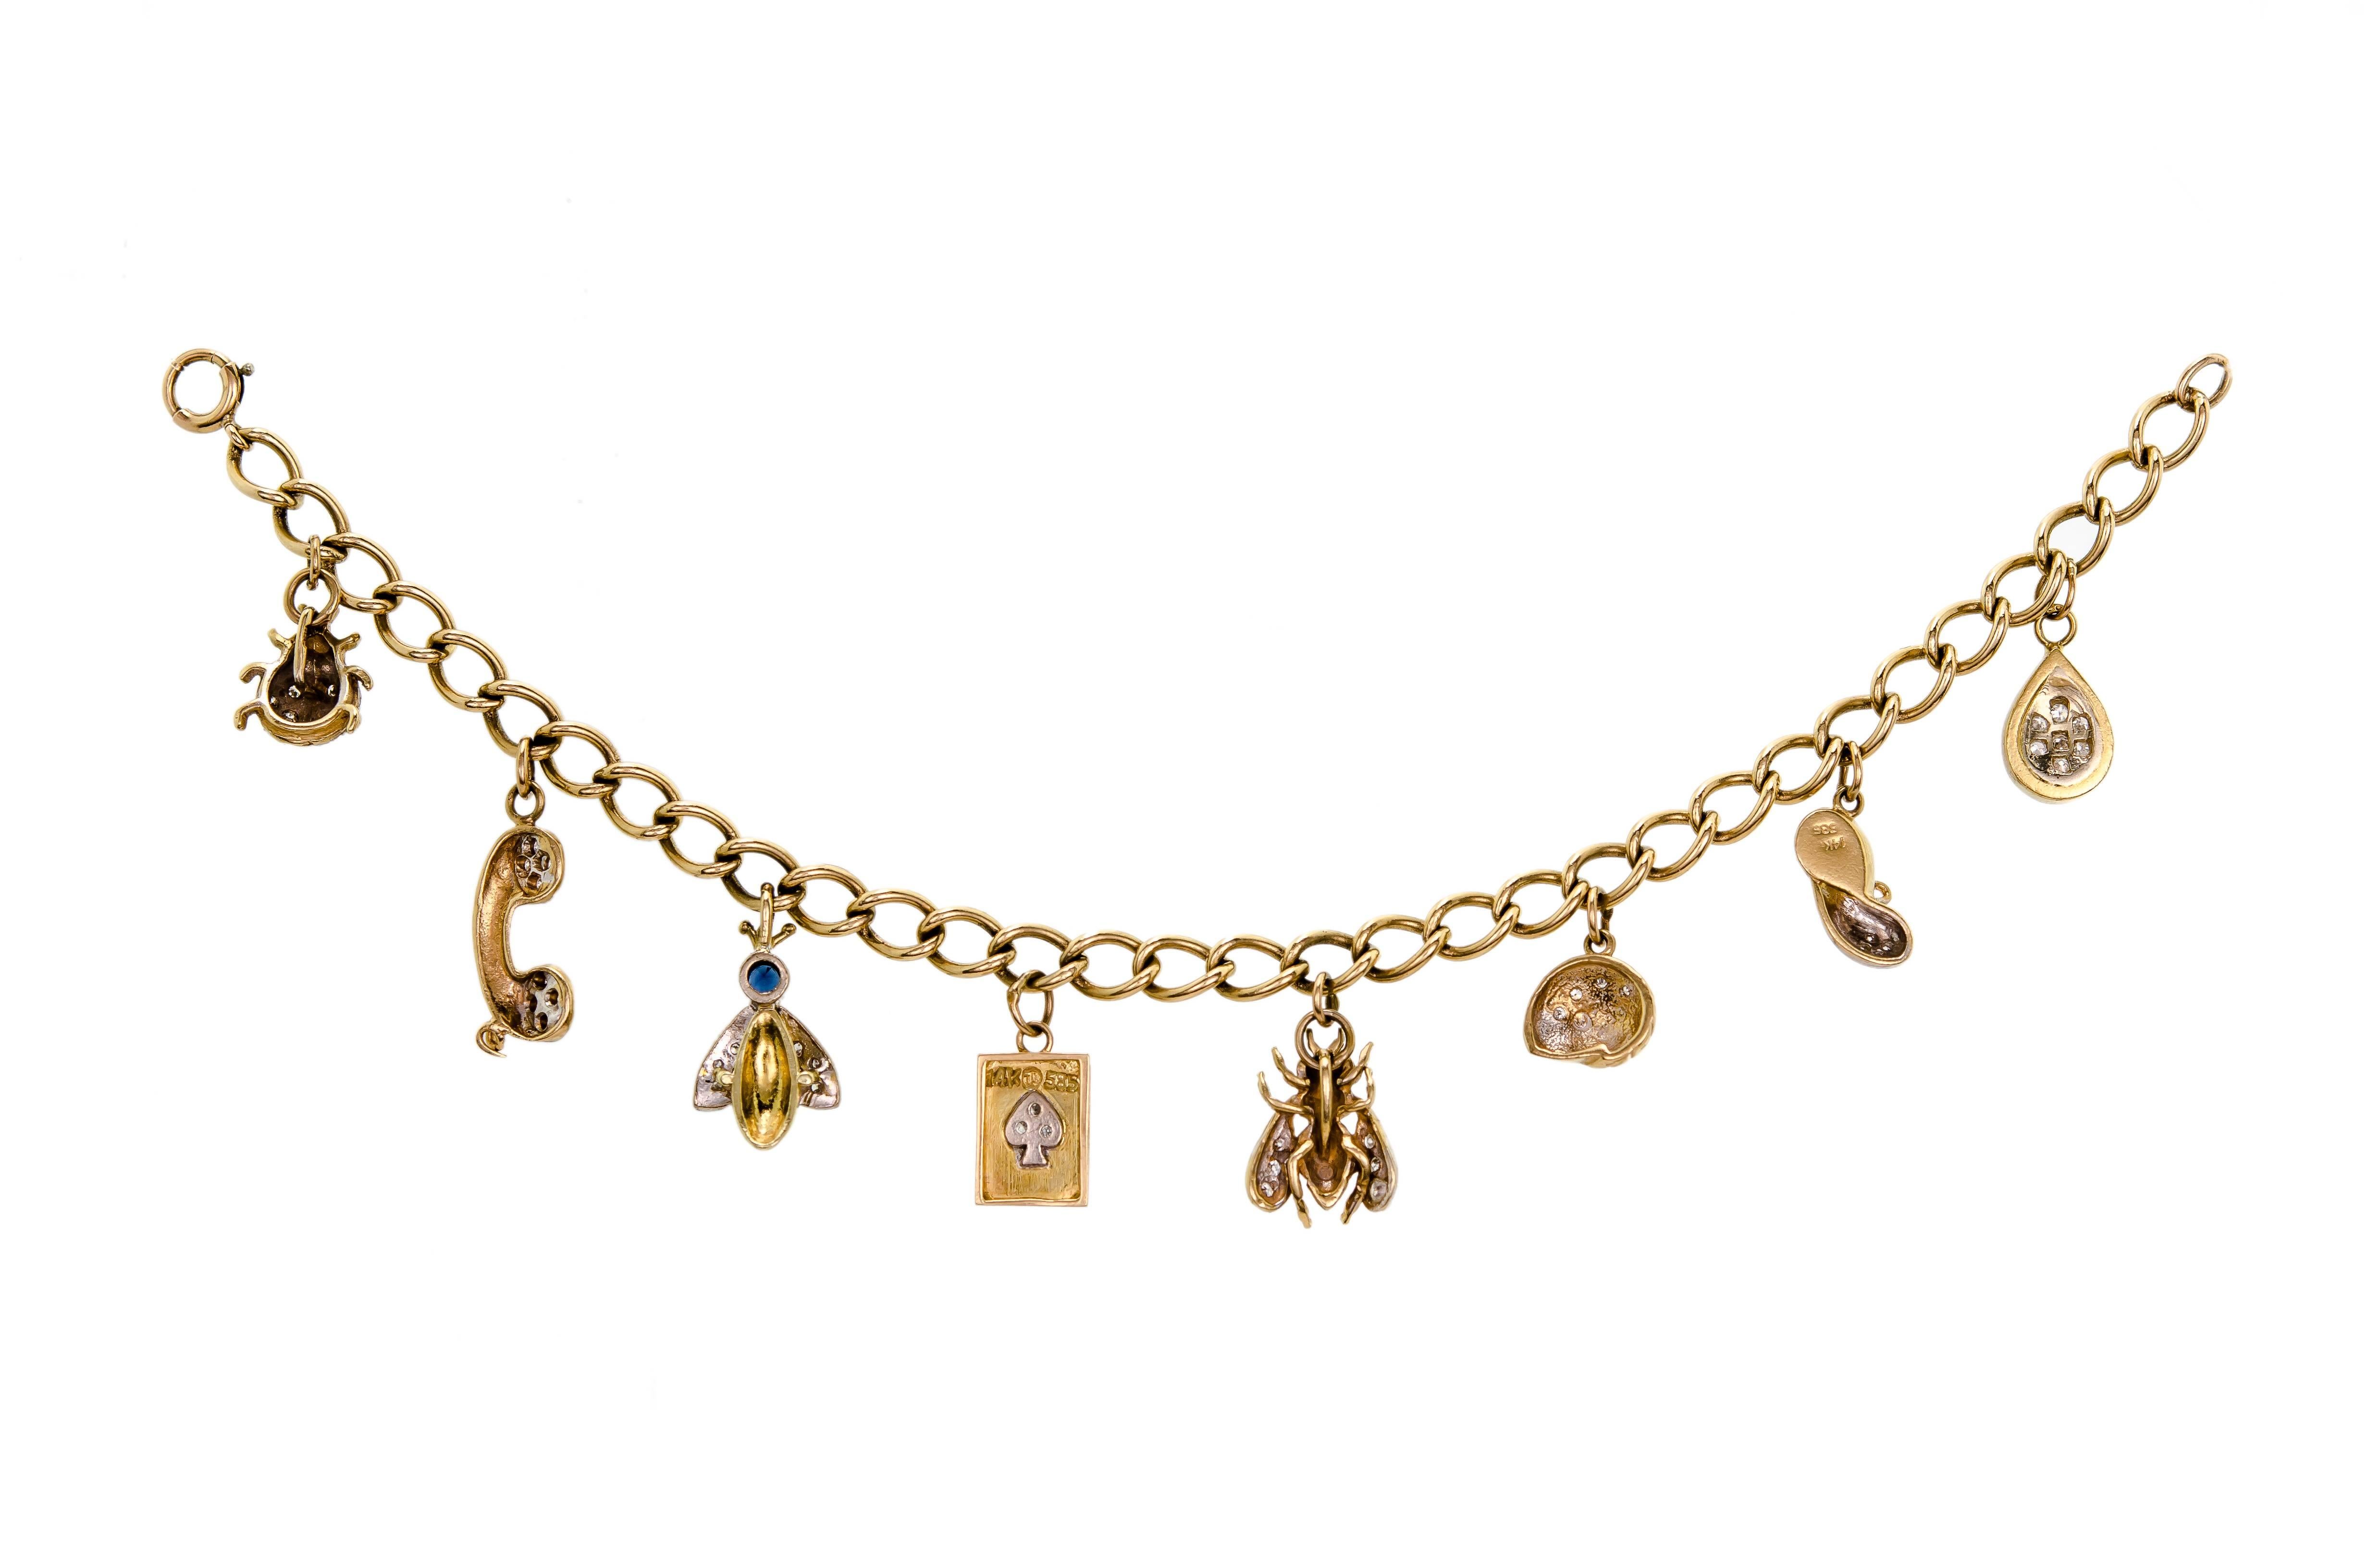 Charming 1940-50 14kt yellow gold and diamond charm bracelet with 8 14kt yellow gold and diamond charms. Wonderful charm bracelet. Excellent condition. Spring ring clasp. Unusual to find all diamond accented charm bracelet. A must have!!